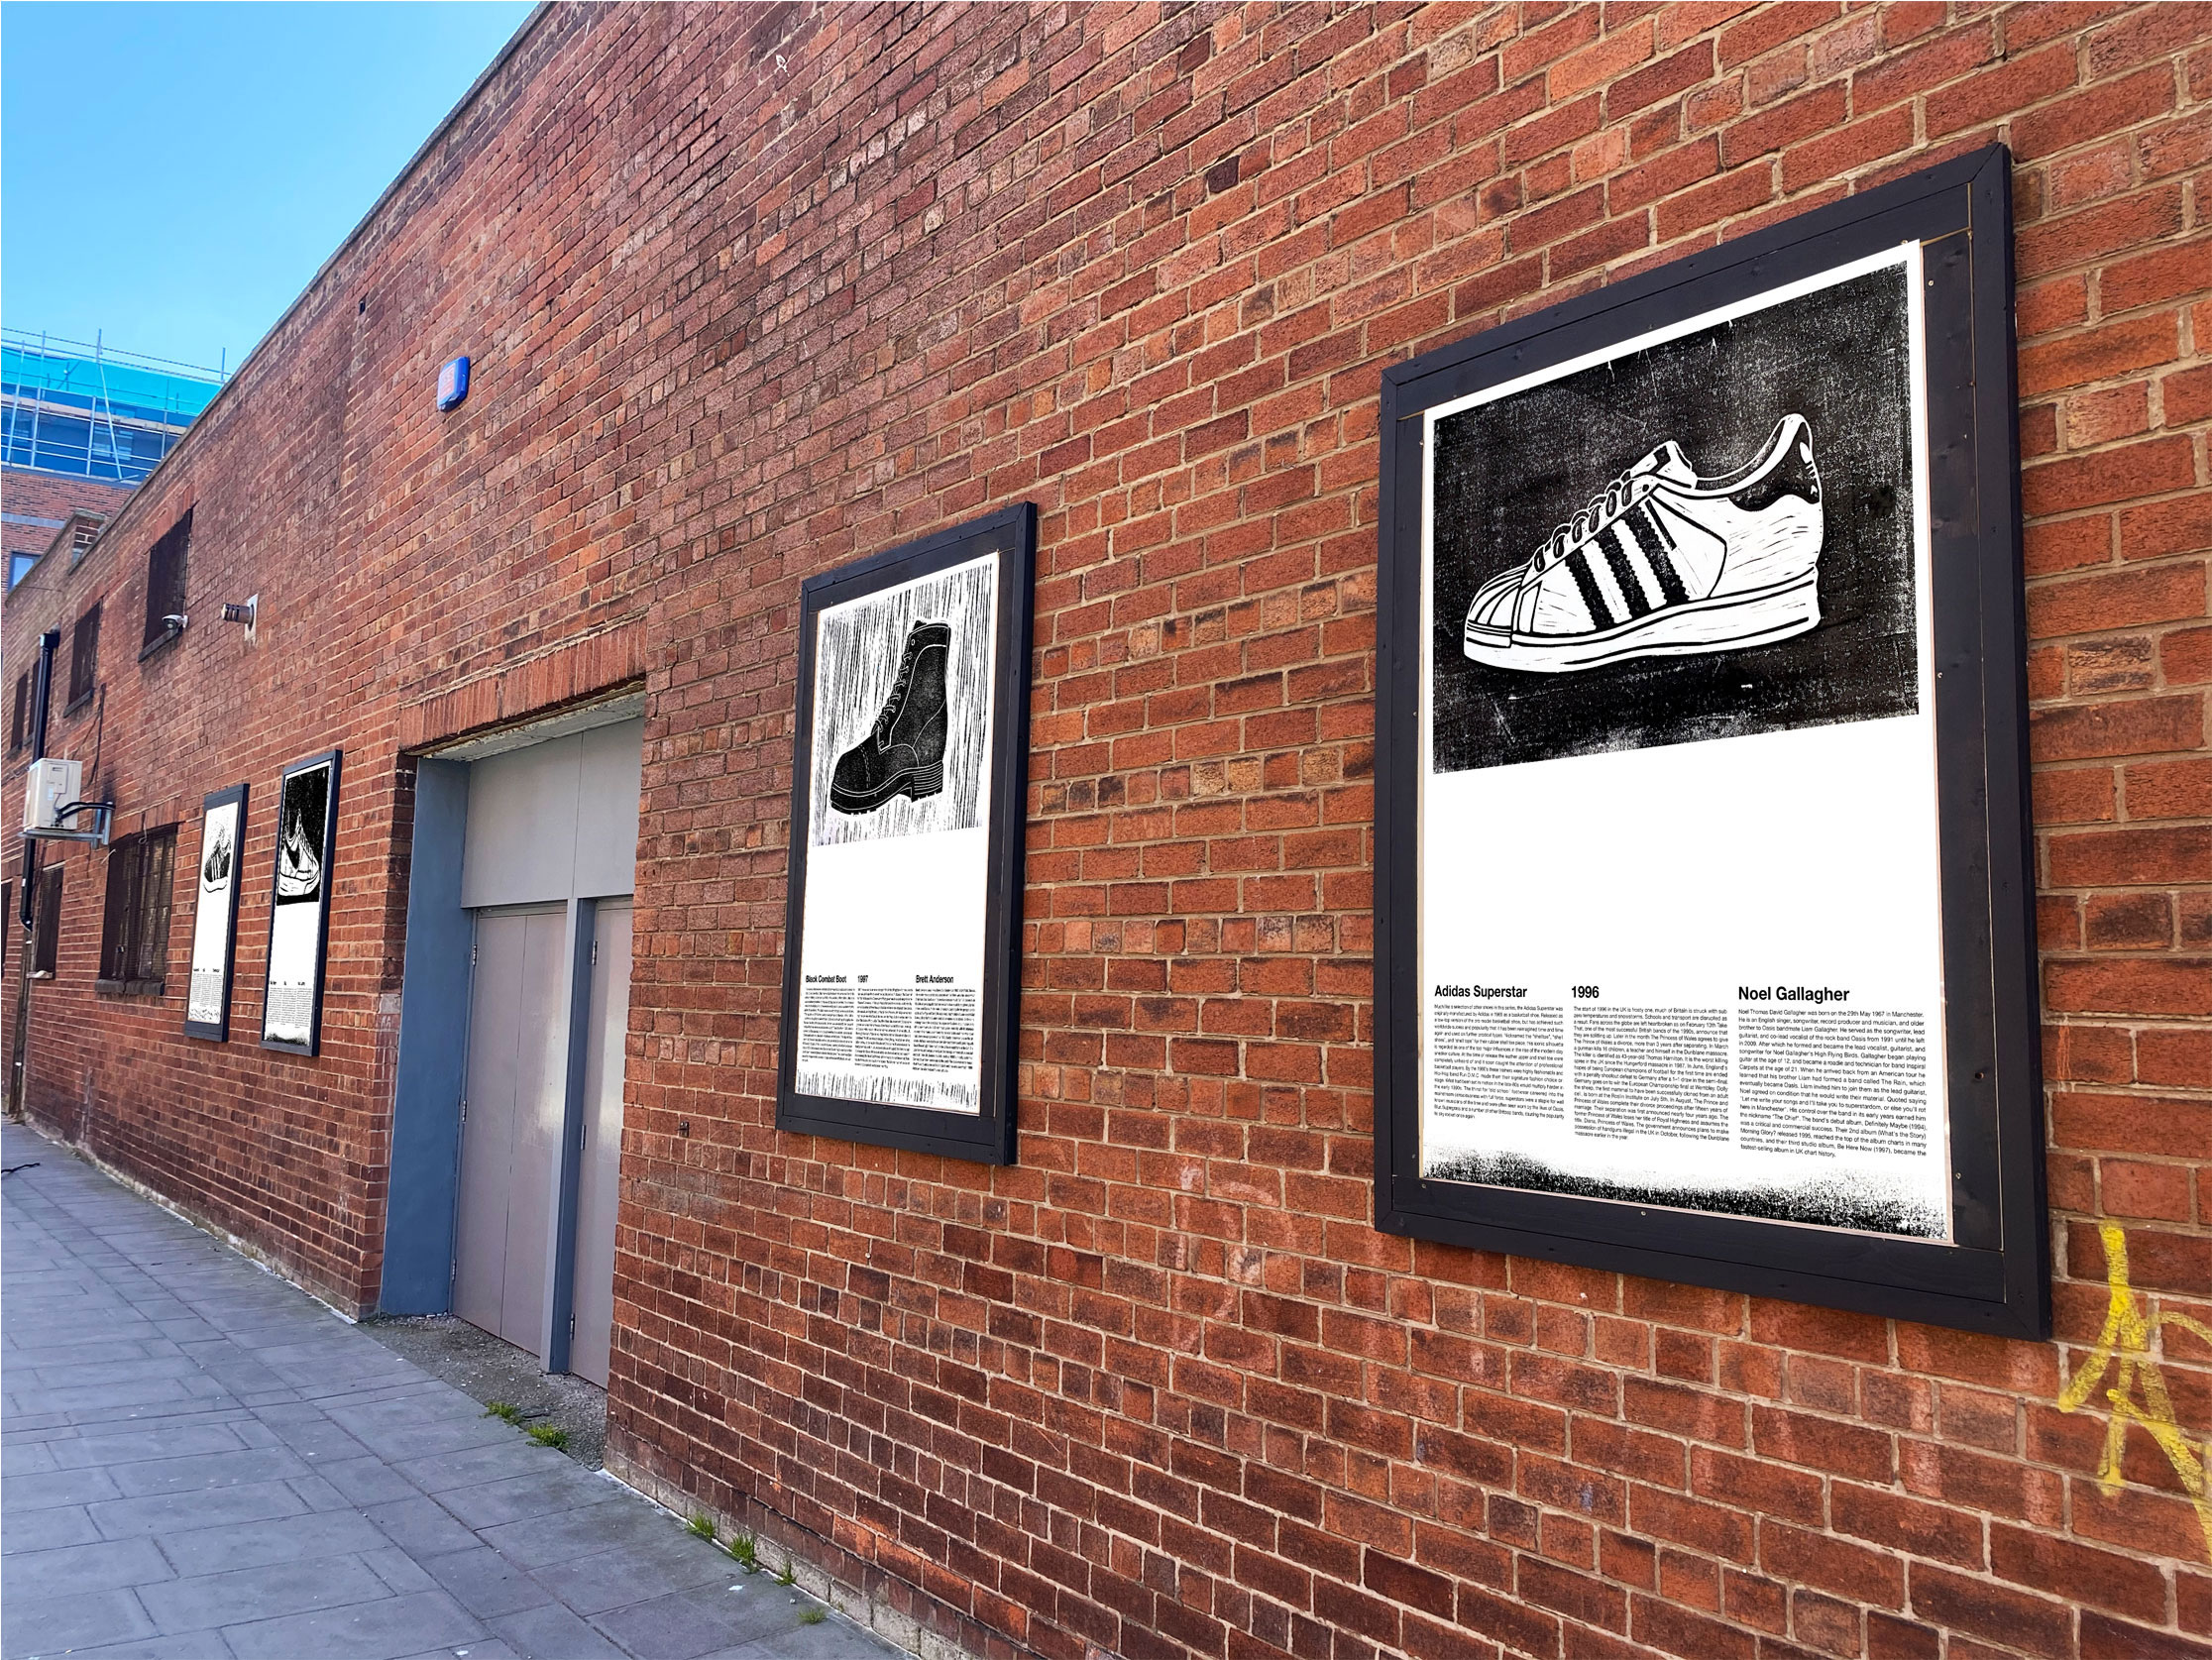 Mock-up photograph, series of poster in situe, featuring linocut print of trainers